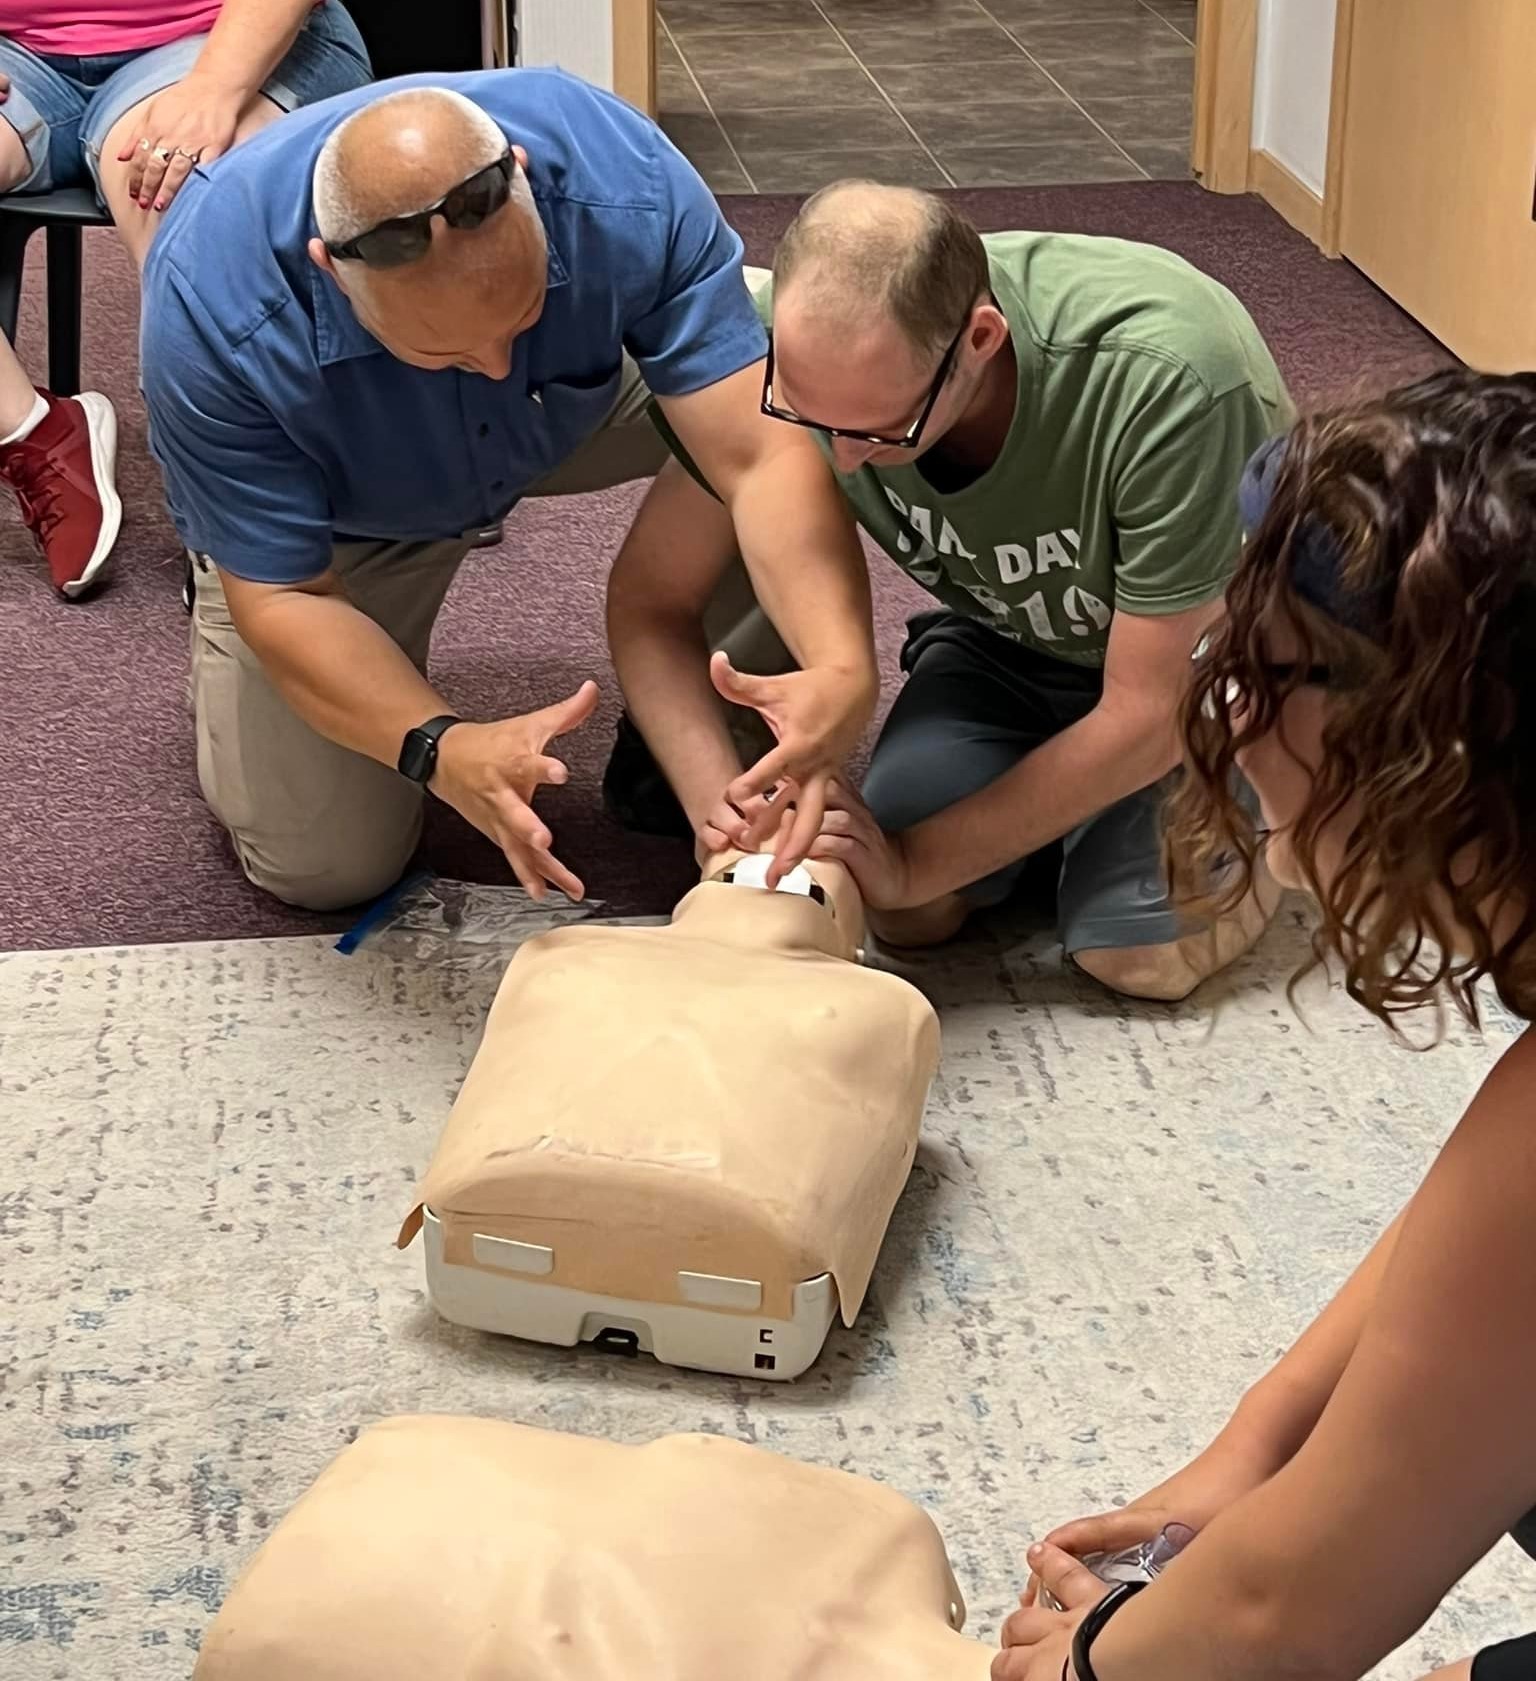 Participants with intellectual disabilities learn how to perform CPR. 